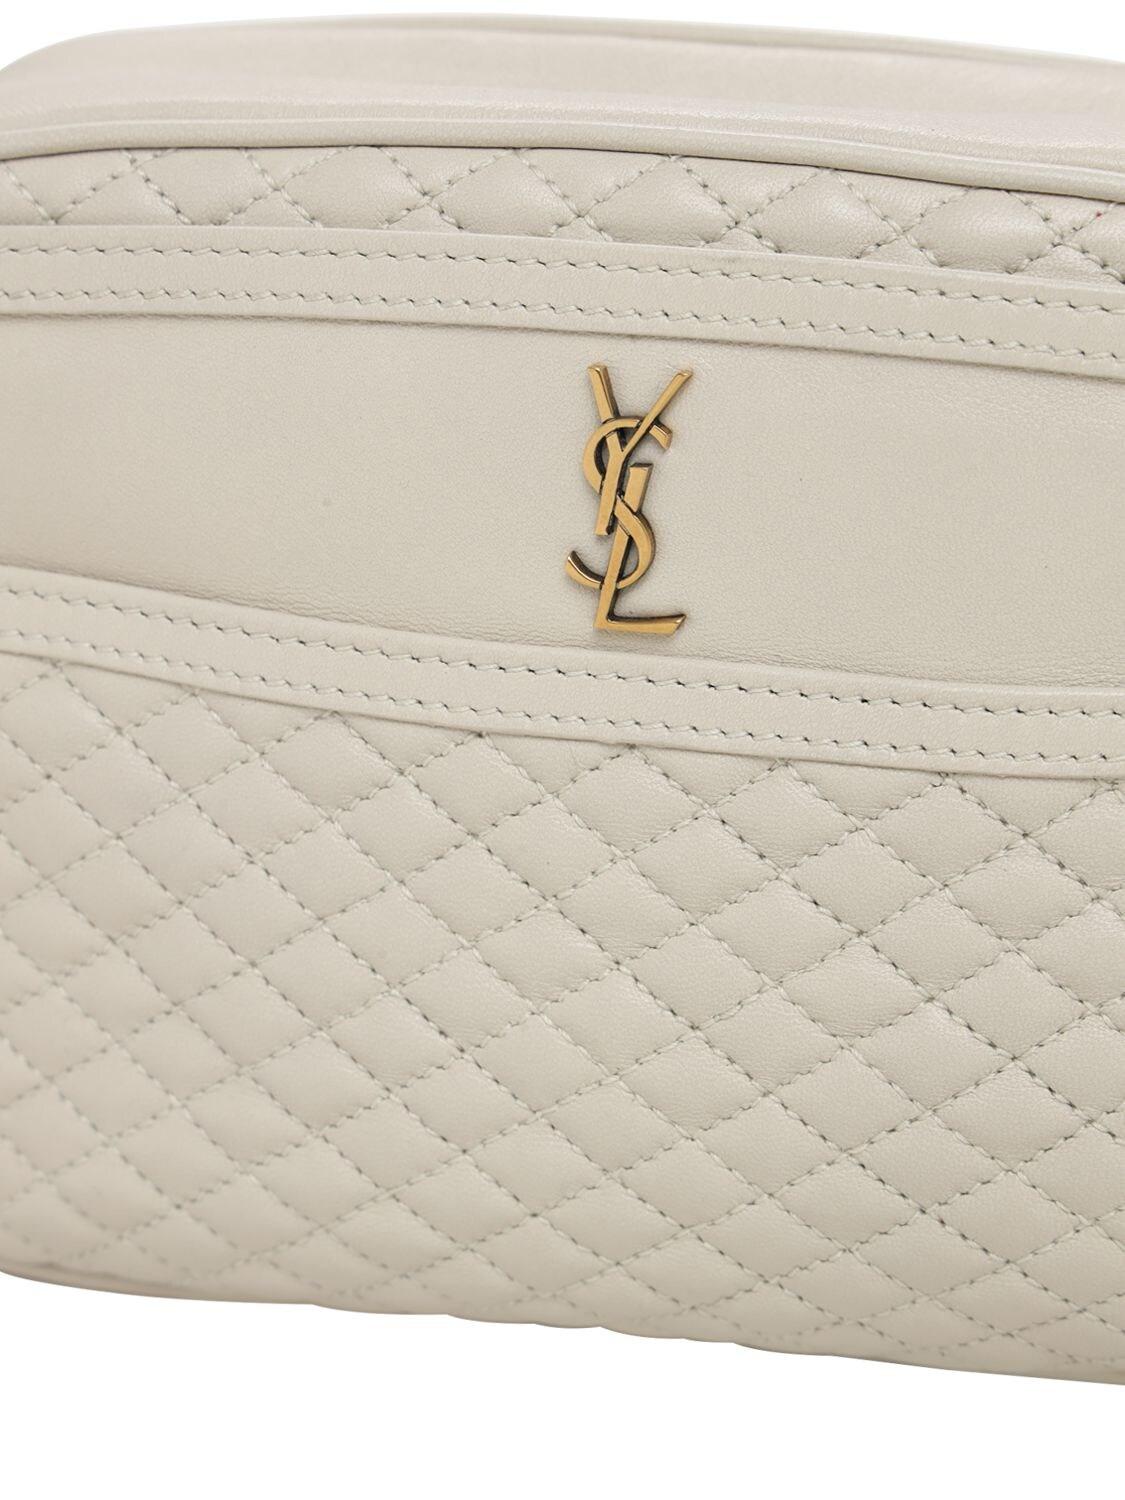 Saint Laurent Victoire Quilted Leather Camera Bag | Lyst